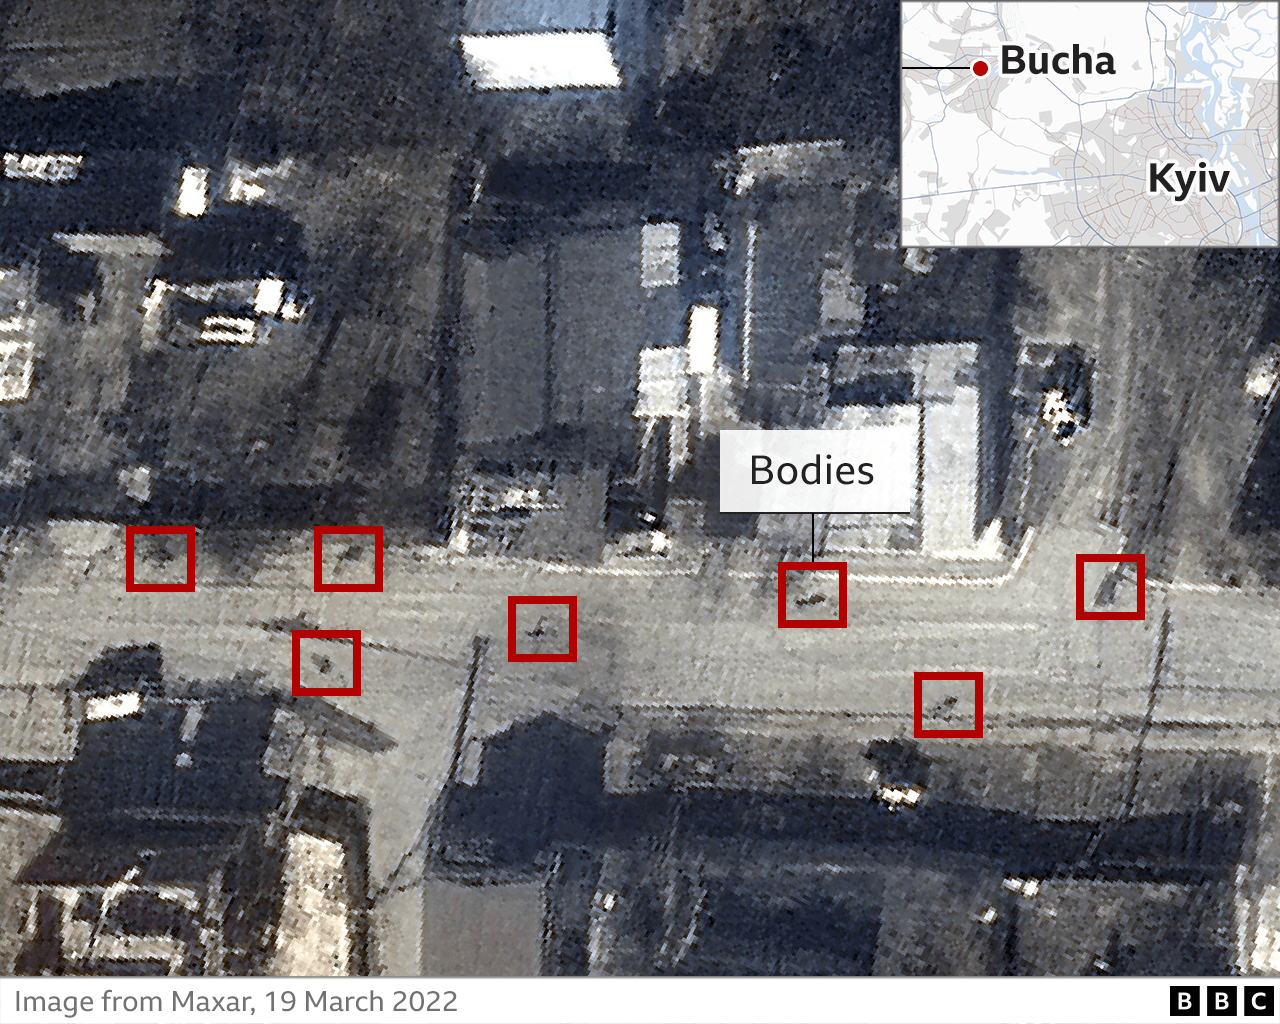 Bucha killings Satellite image of bodies site contradicts Russian claims photo pic